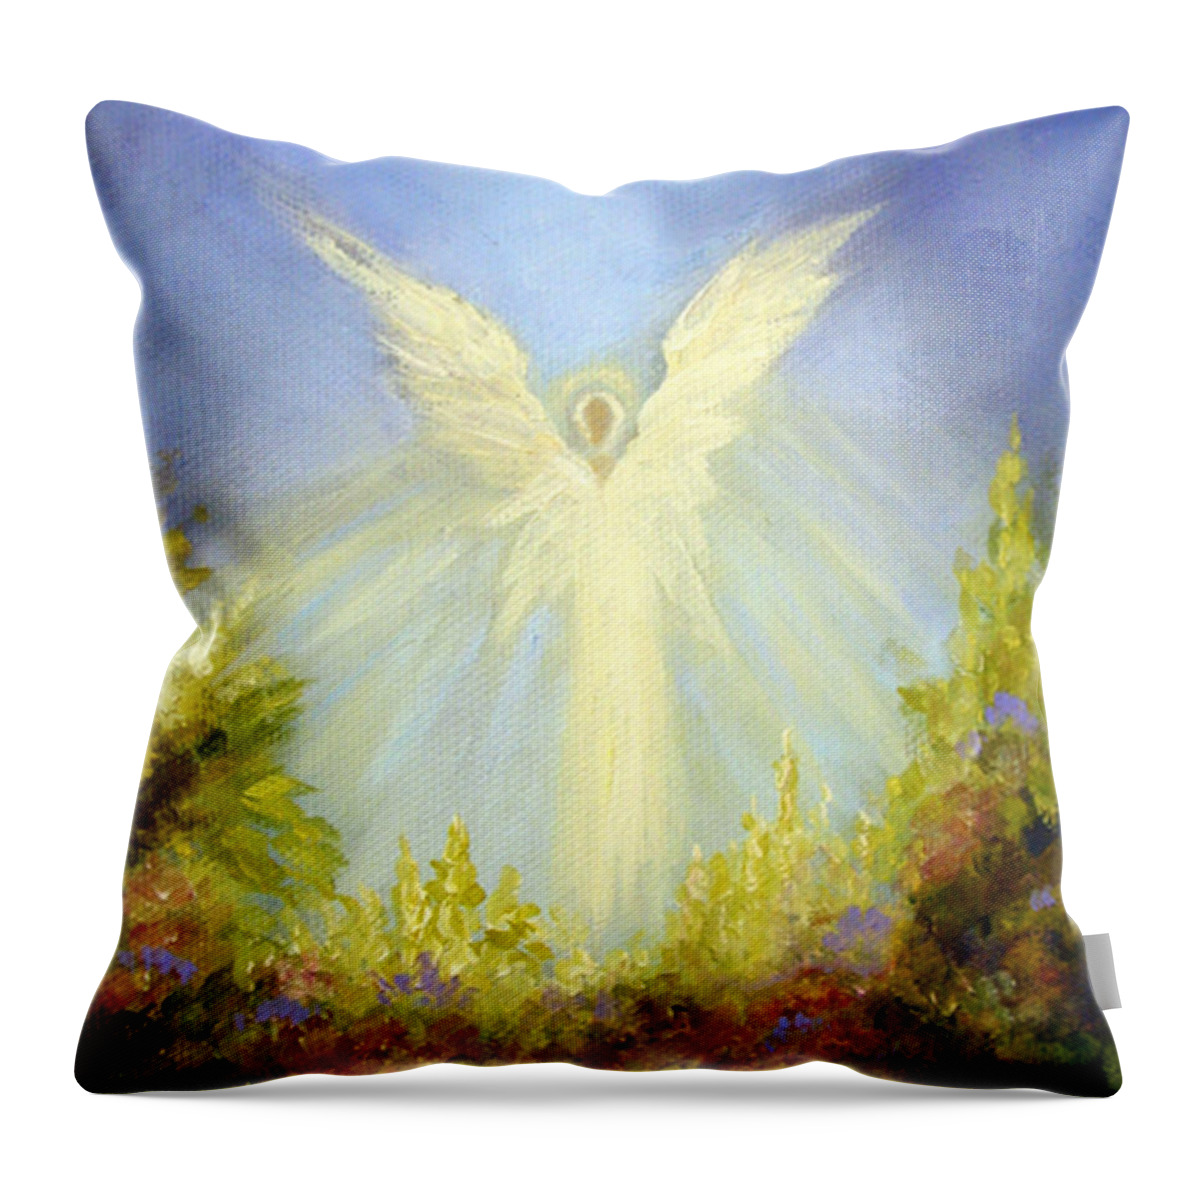 Angel Throw Pillow featuring the painting Angel's Garden by Marina Petro